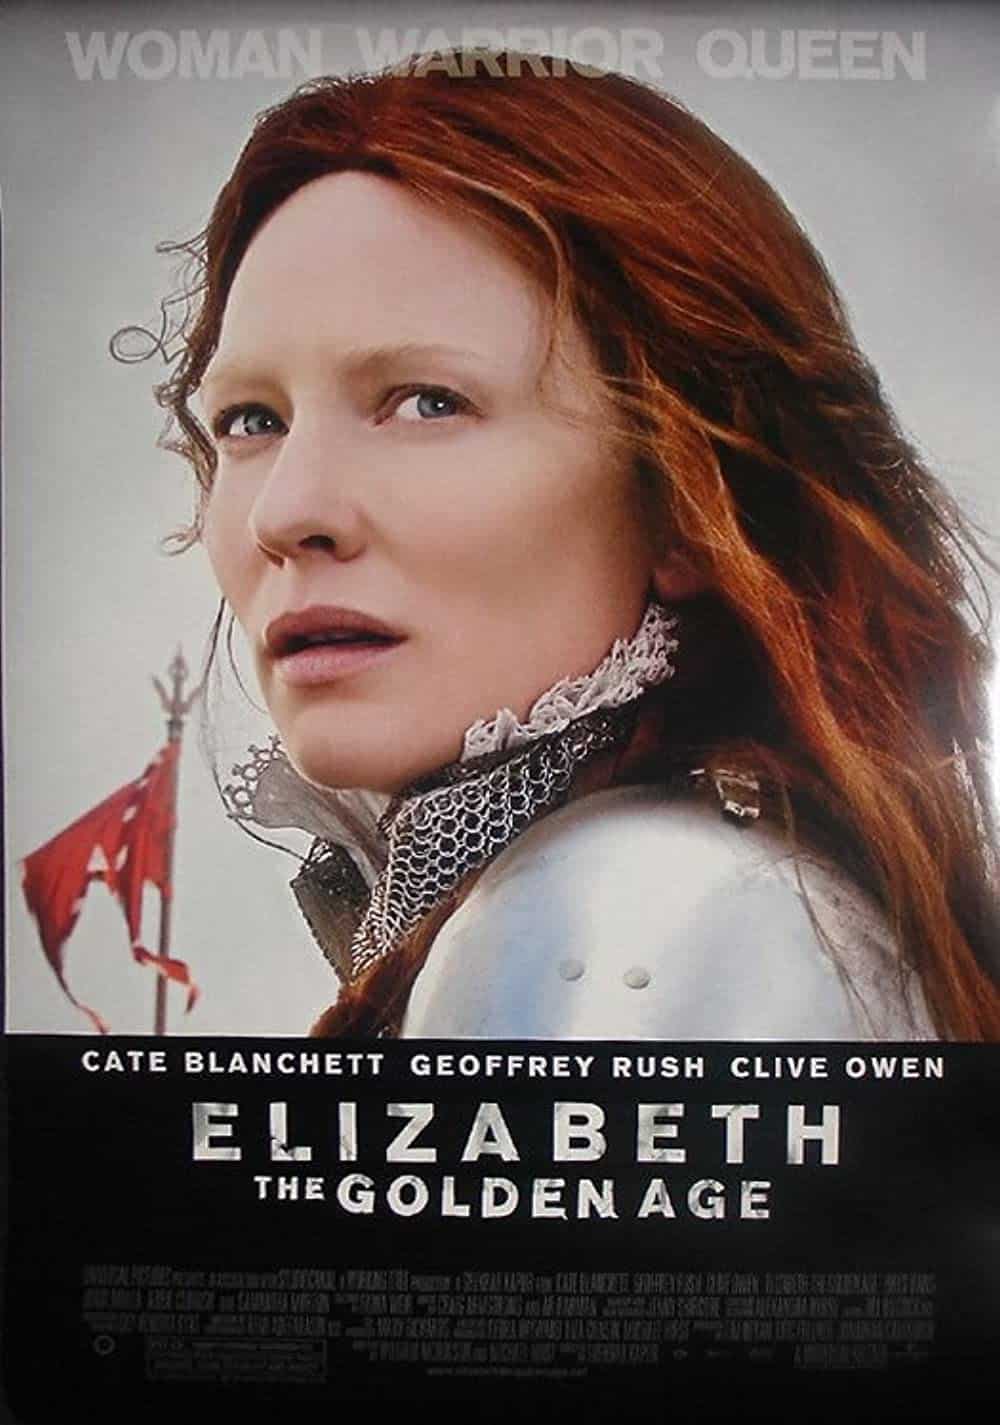 Elizabeth The Golden Age (2007) Best Knight Movies to Add in Your Watchlist